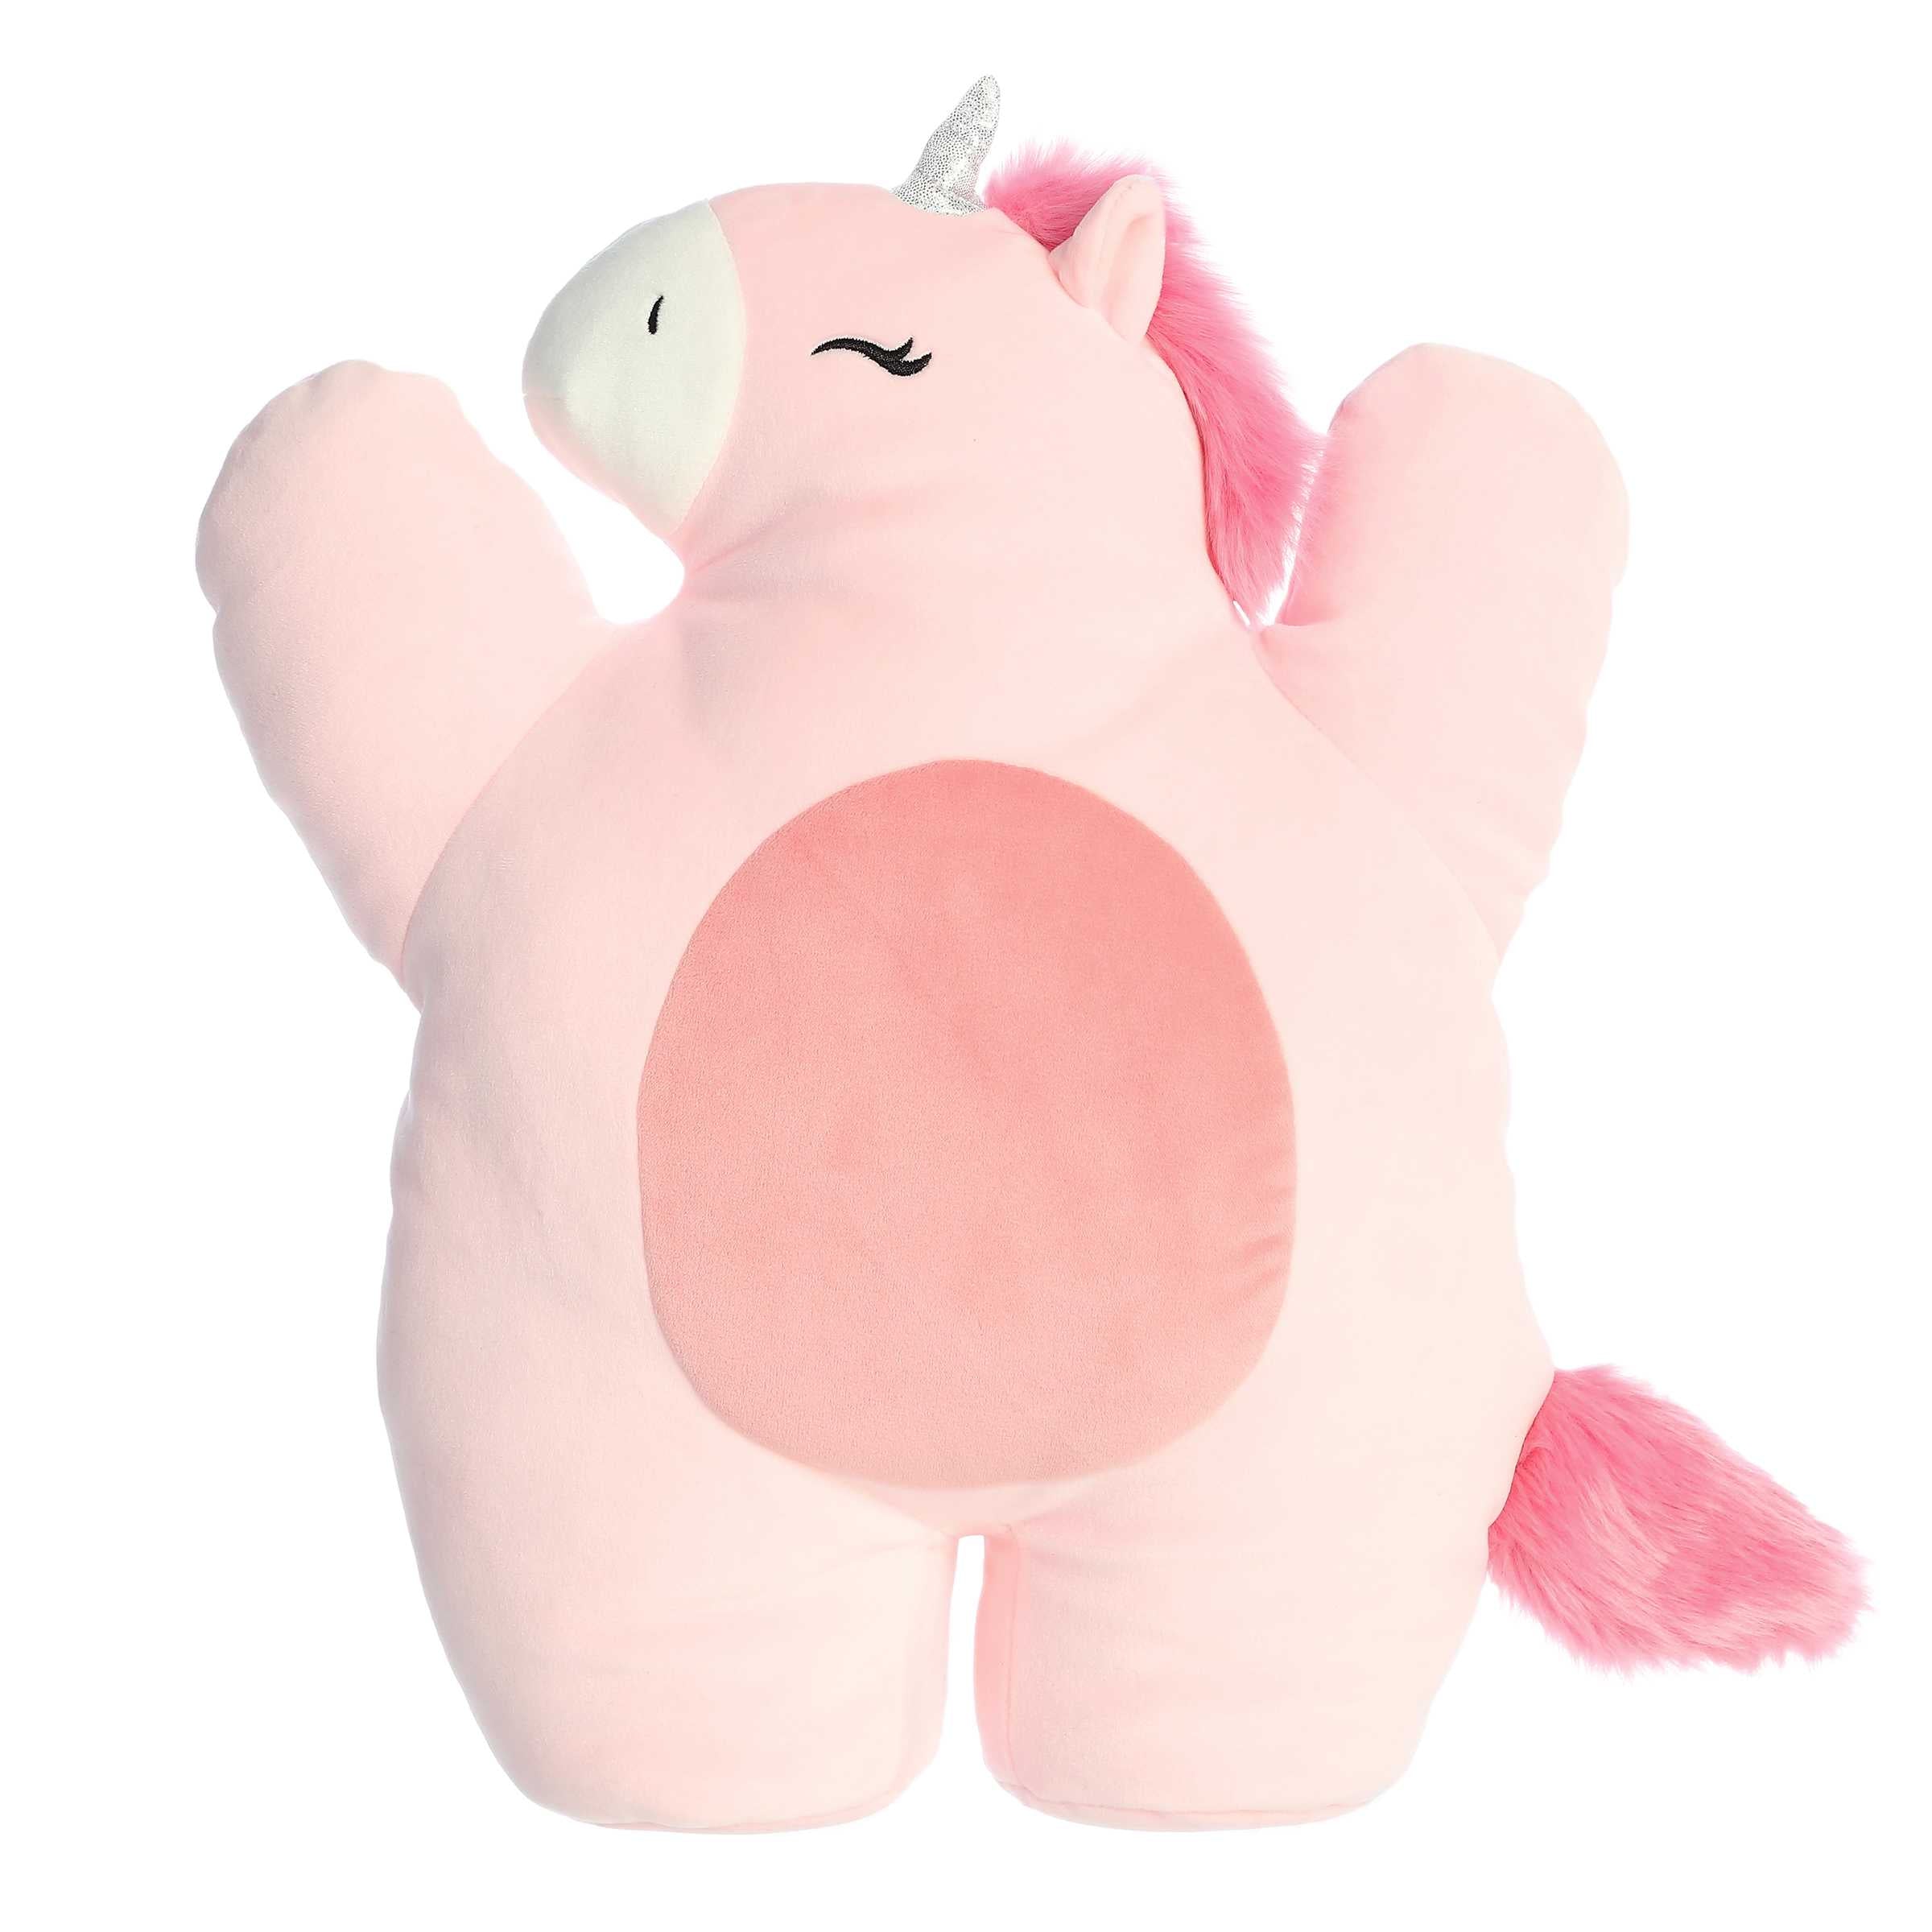 Cuddly unicorn plush toy with a light pink body, dark pink mane and tail, a silver sparkly horn, and black accents on eyes